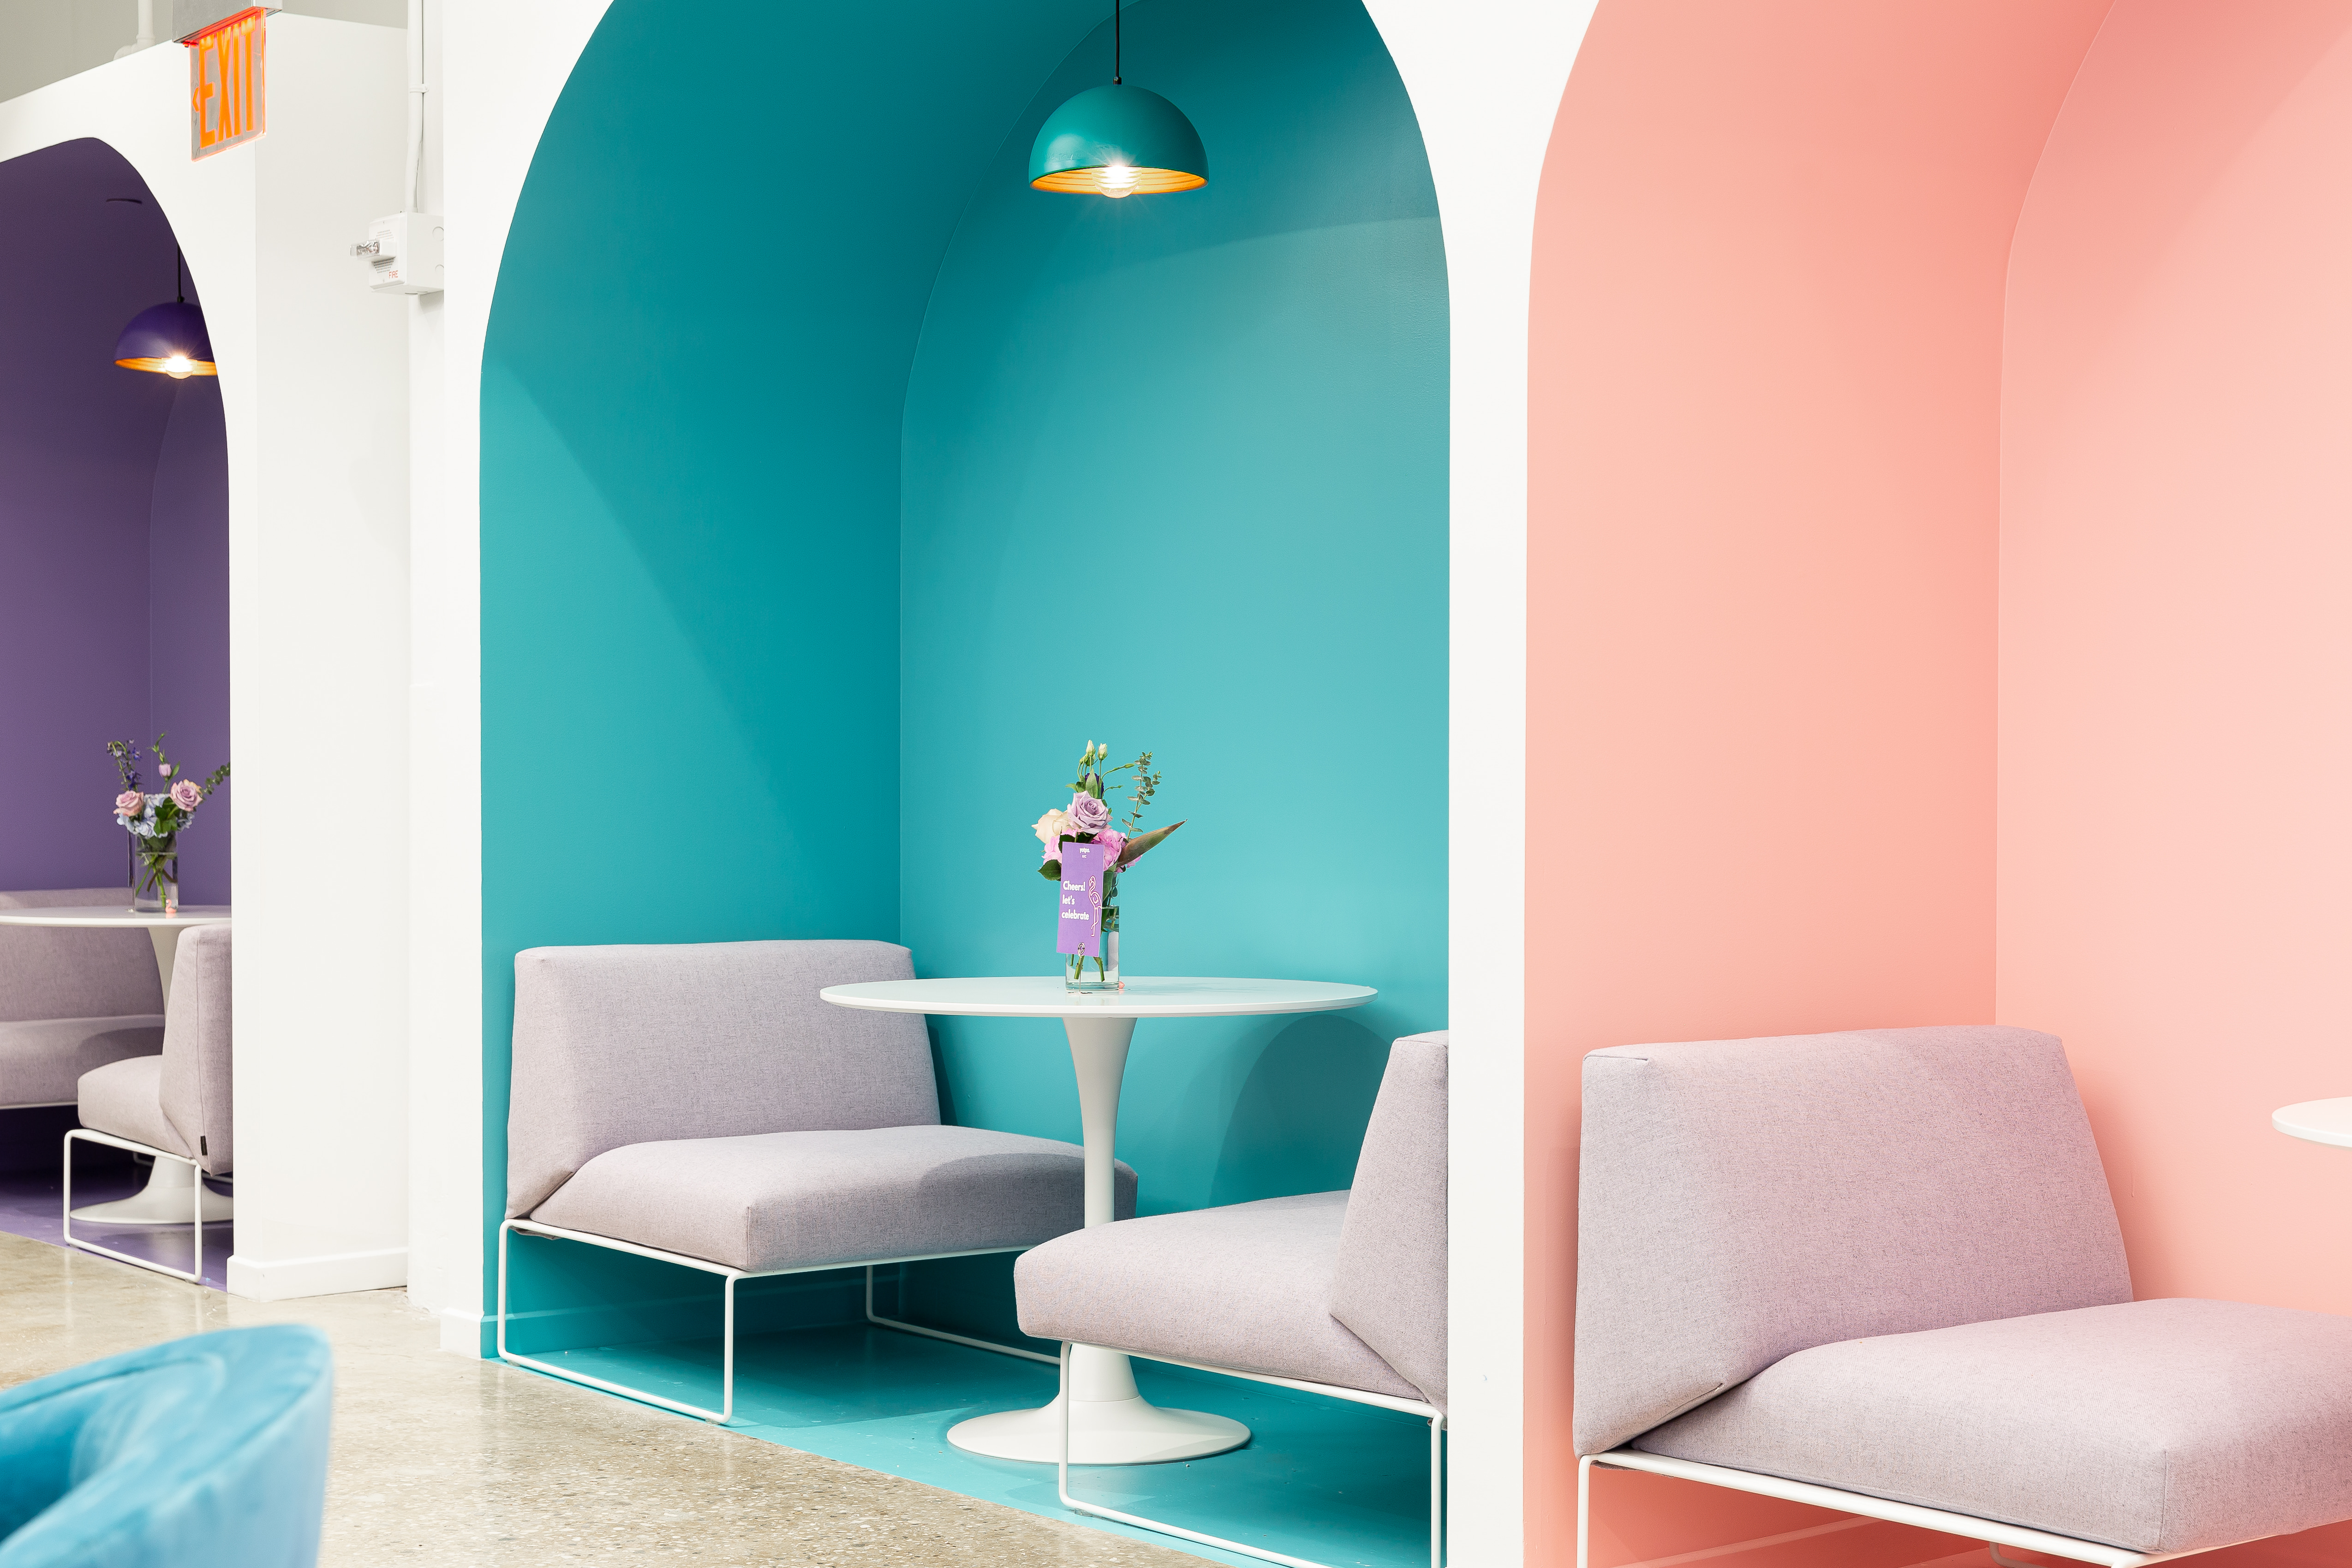 Photo of Yotpo’s NYC office with colorful nooks for two-person seating with a table.